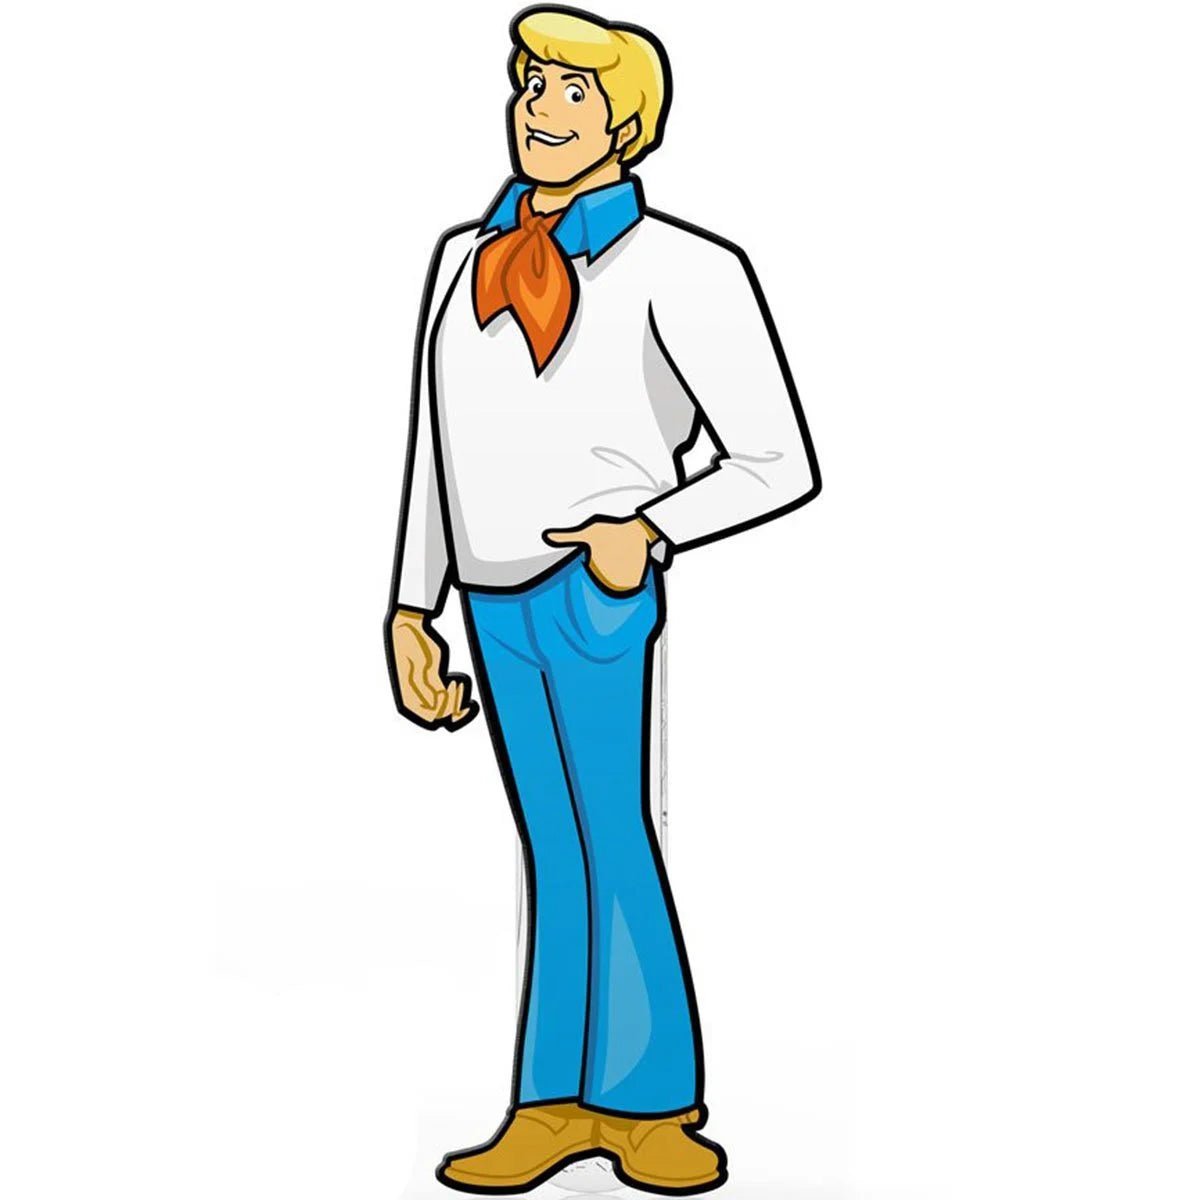 Scooby-Doo Fred Jones FiGPiN Classic 3-Inch Enamel Pin #721 - Simon's Collectibles